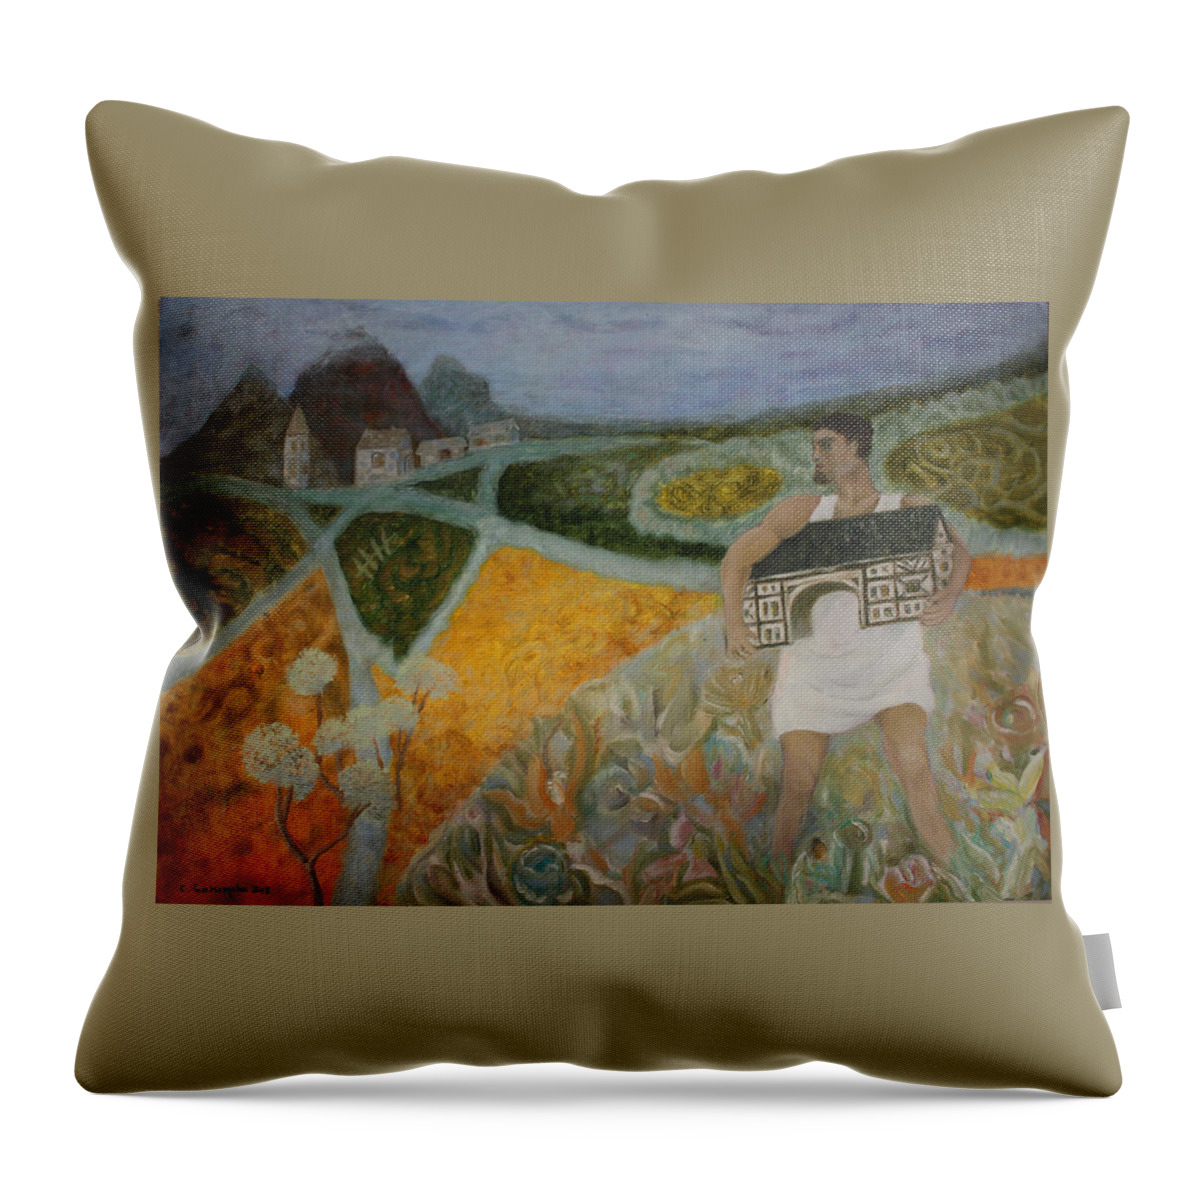 Emigration Throw Pillow featuring the painting Emigration by Elzbieta Goszczycka